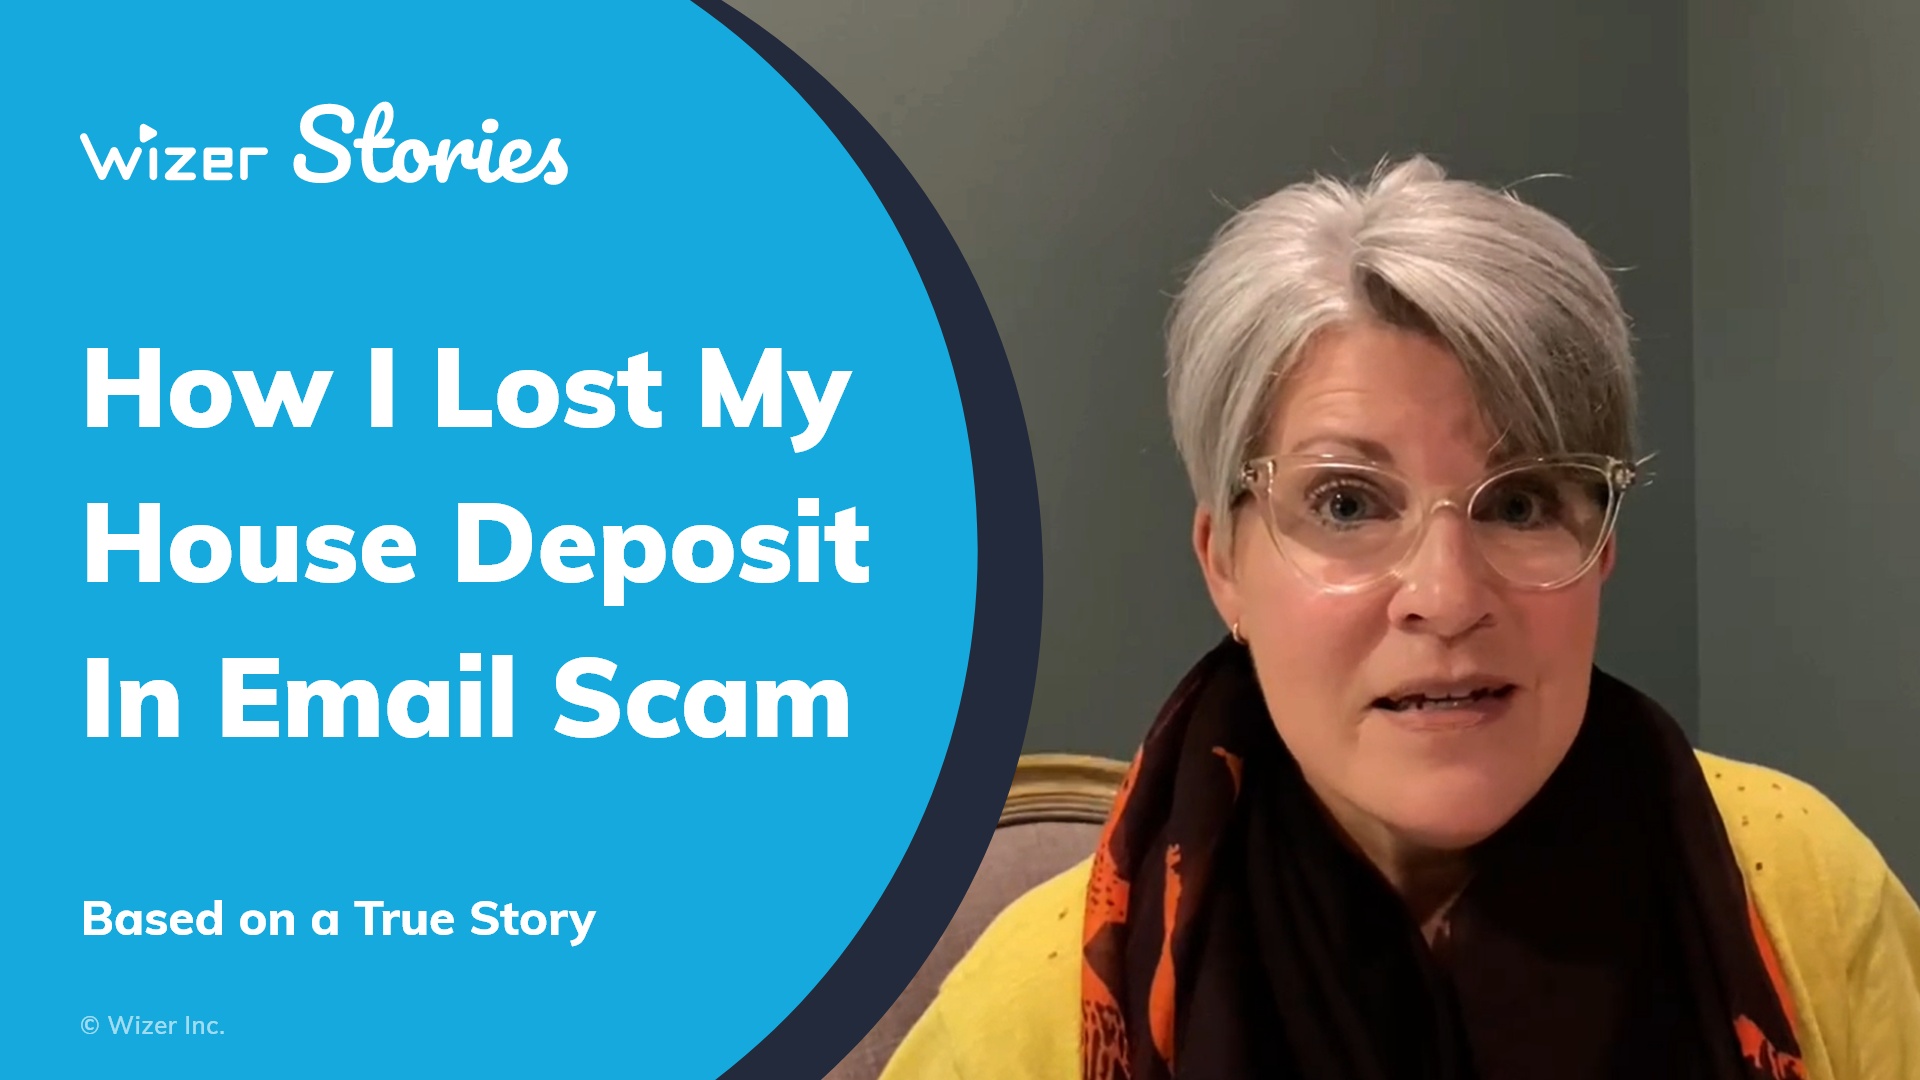 How I lost my house deposit in email scam